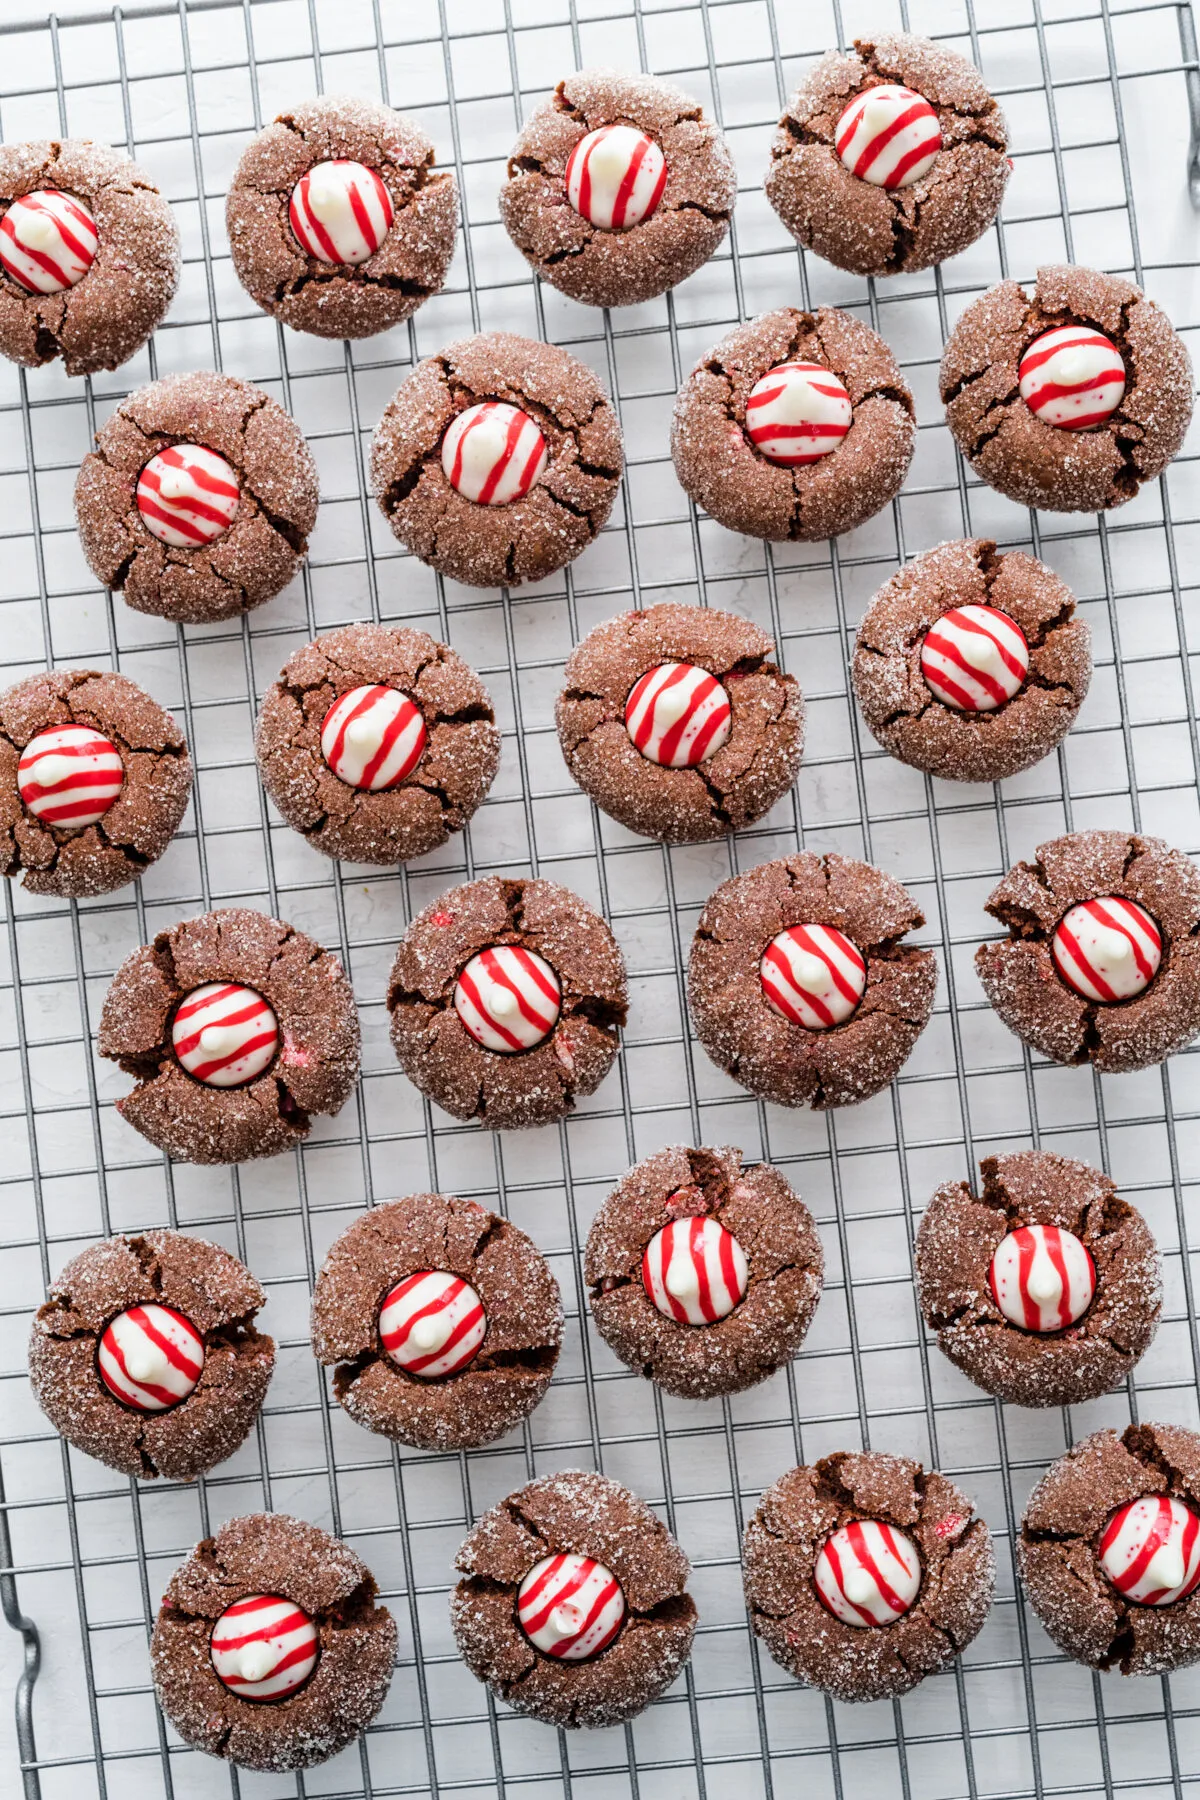 Chocolate peppermint kiss cookies cooling off on a wire rack.